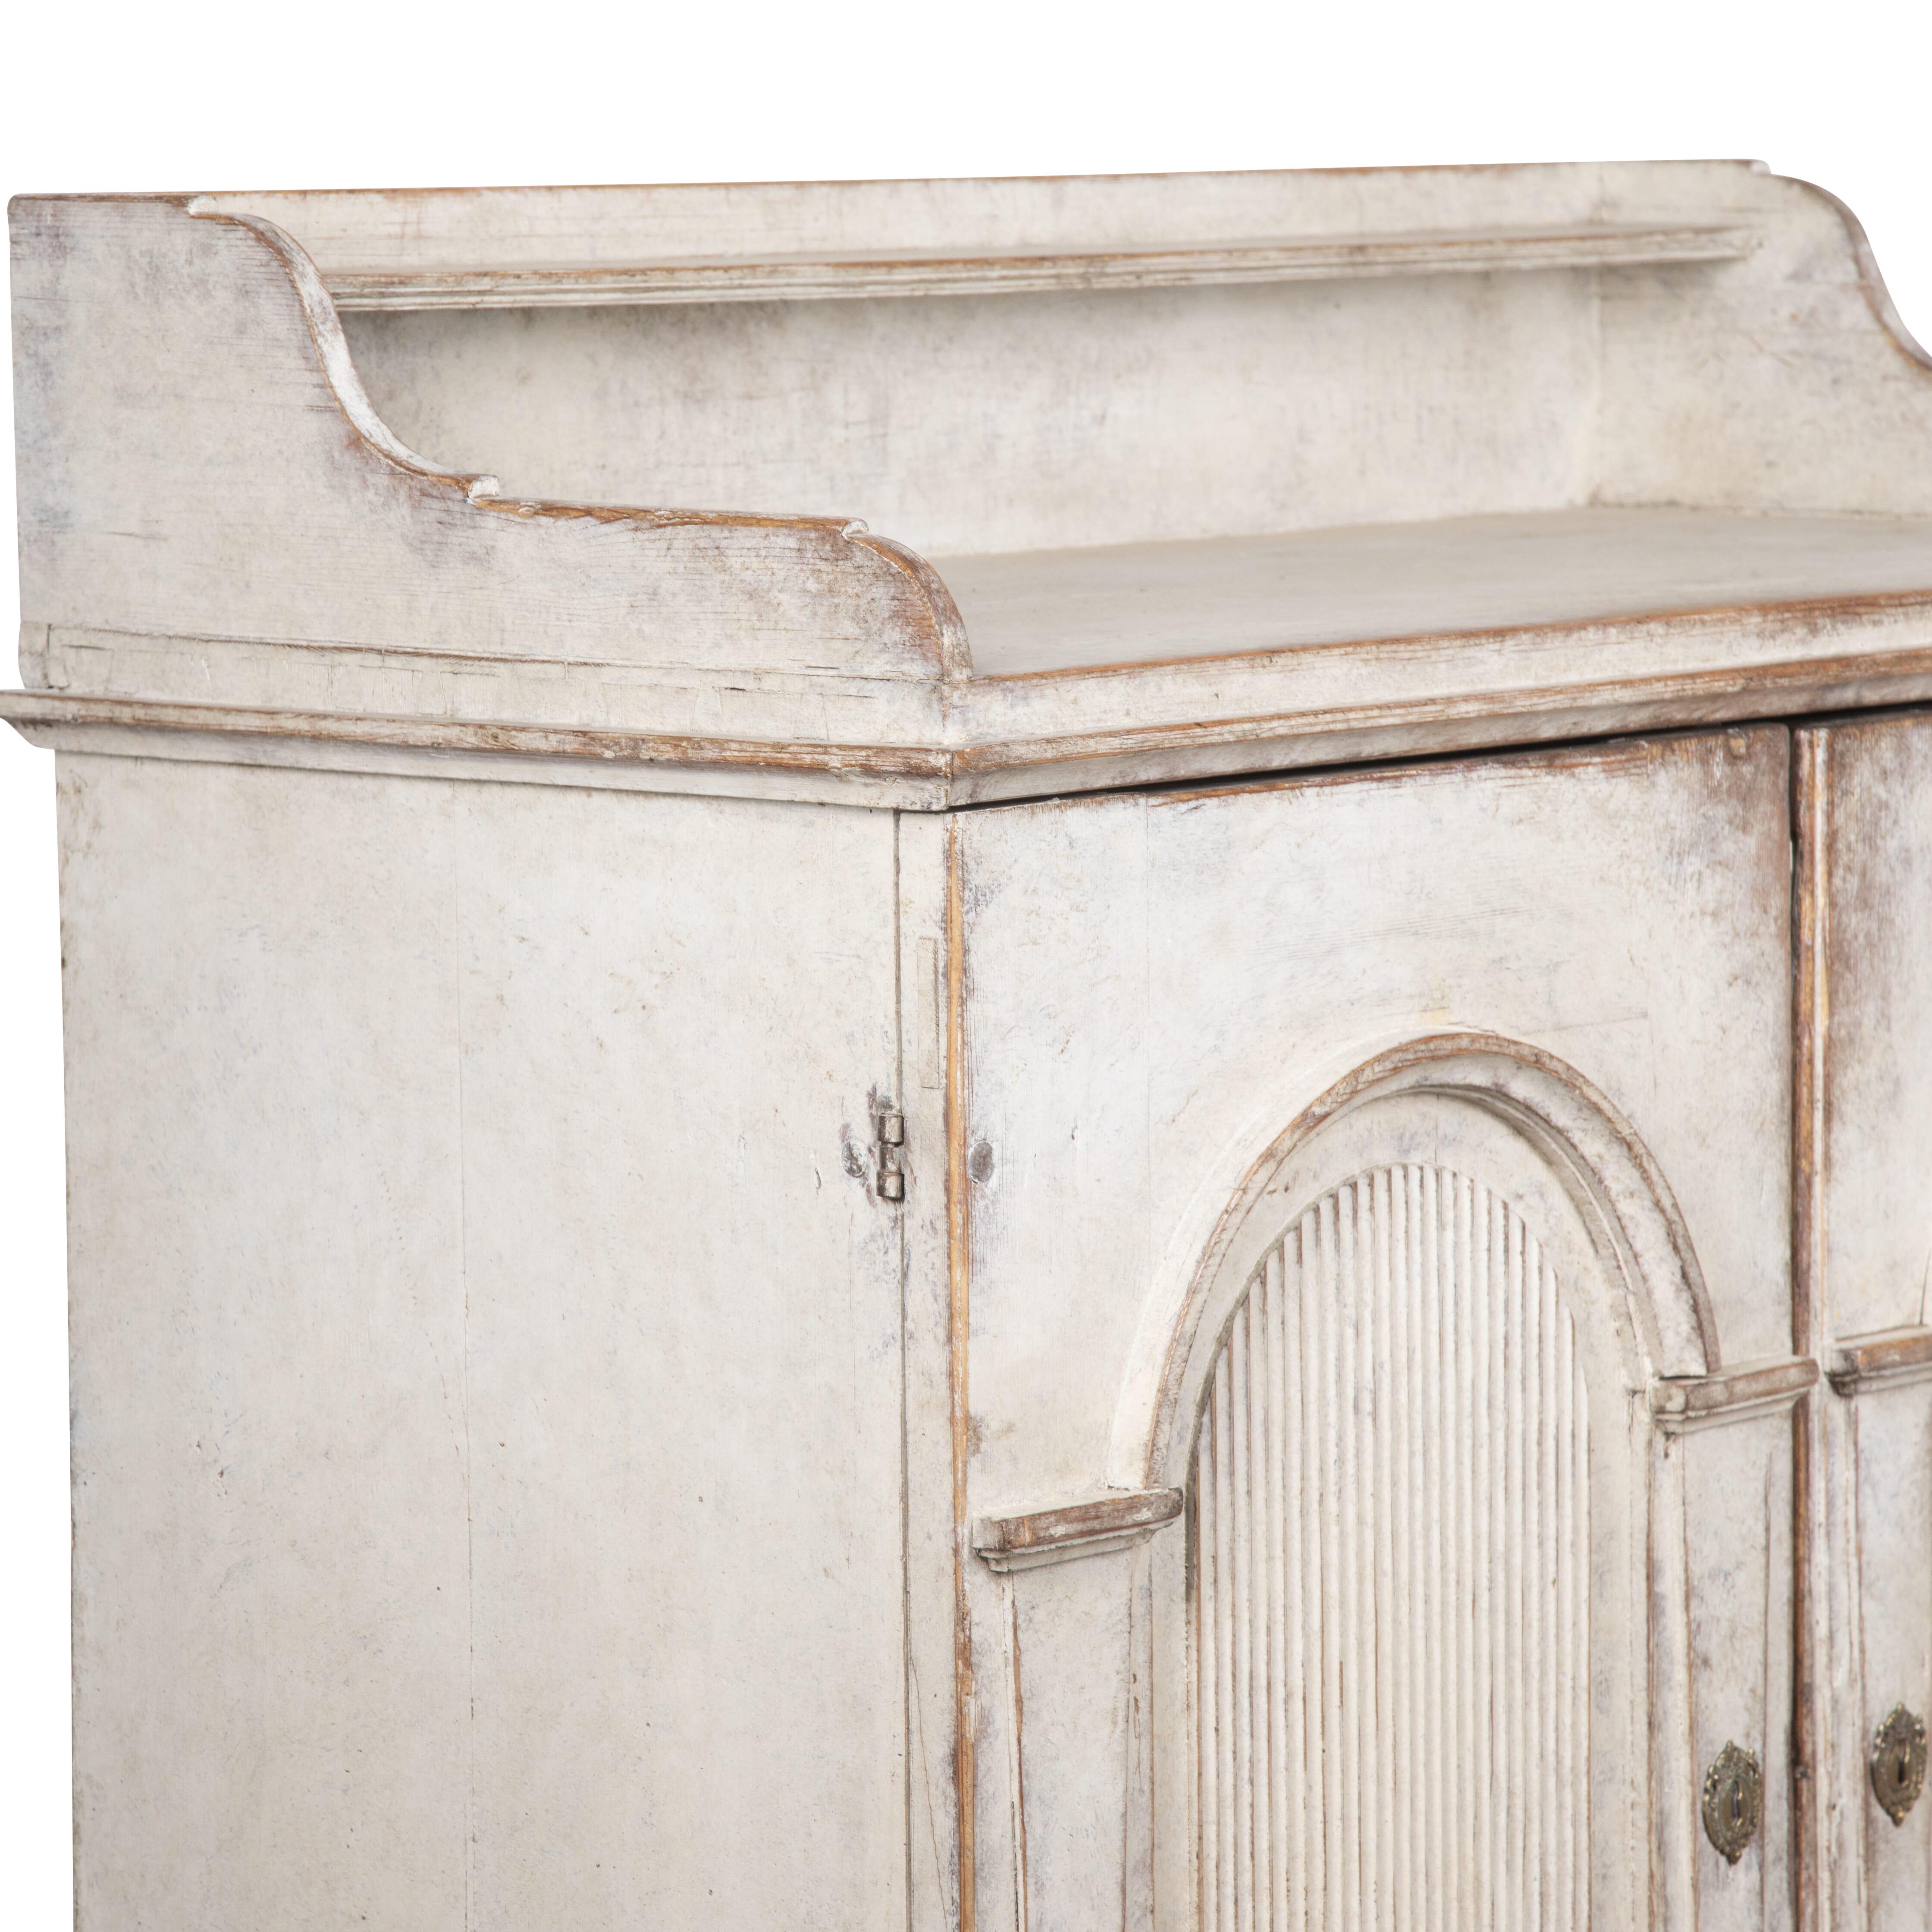 Swedish 19th Century two door buffet.
With a decorative arch and reeded detailing to the doors. 
Circa 1860.